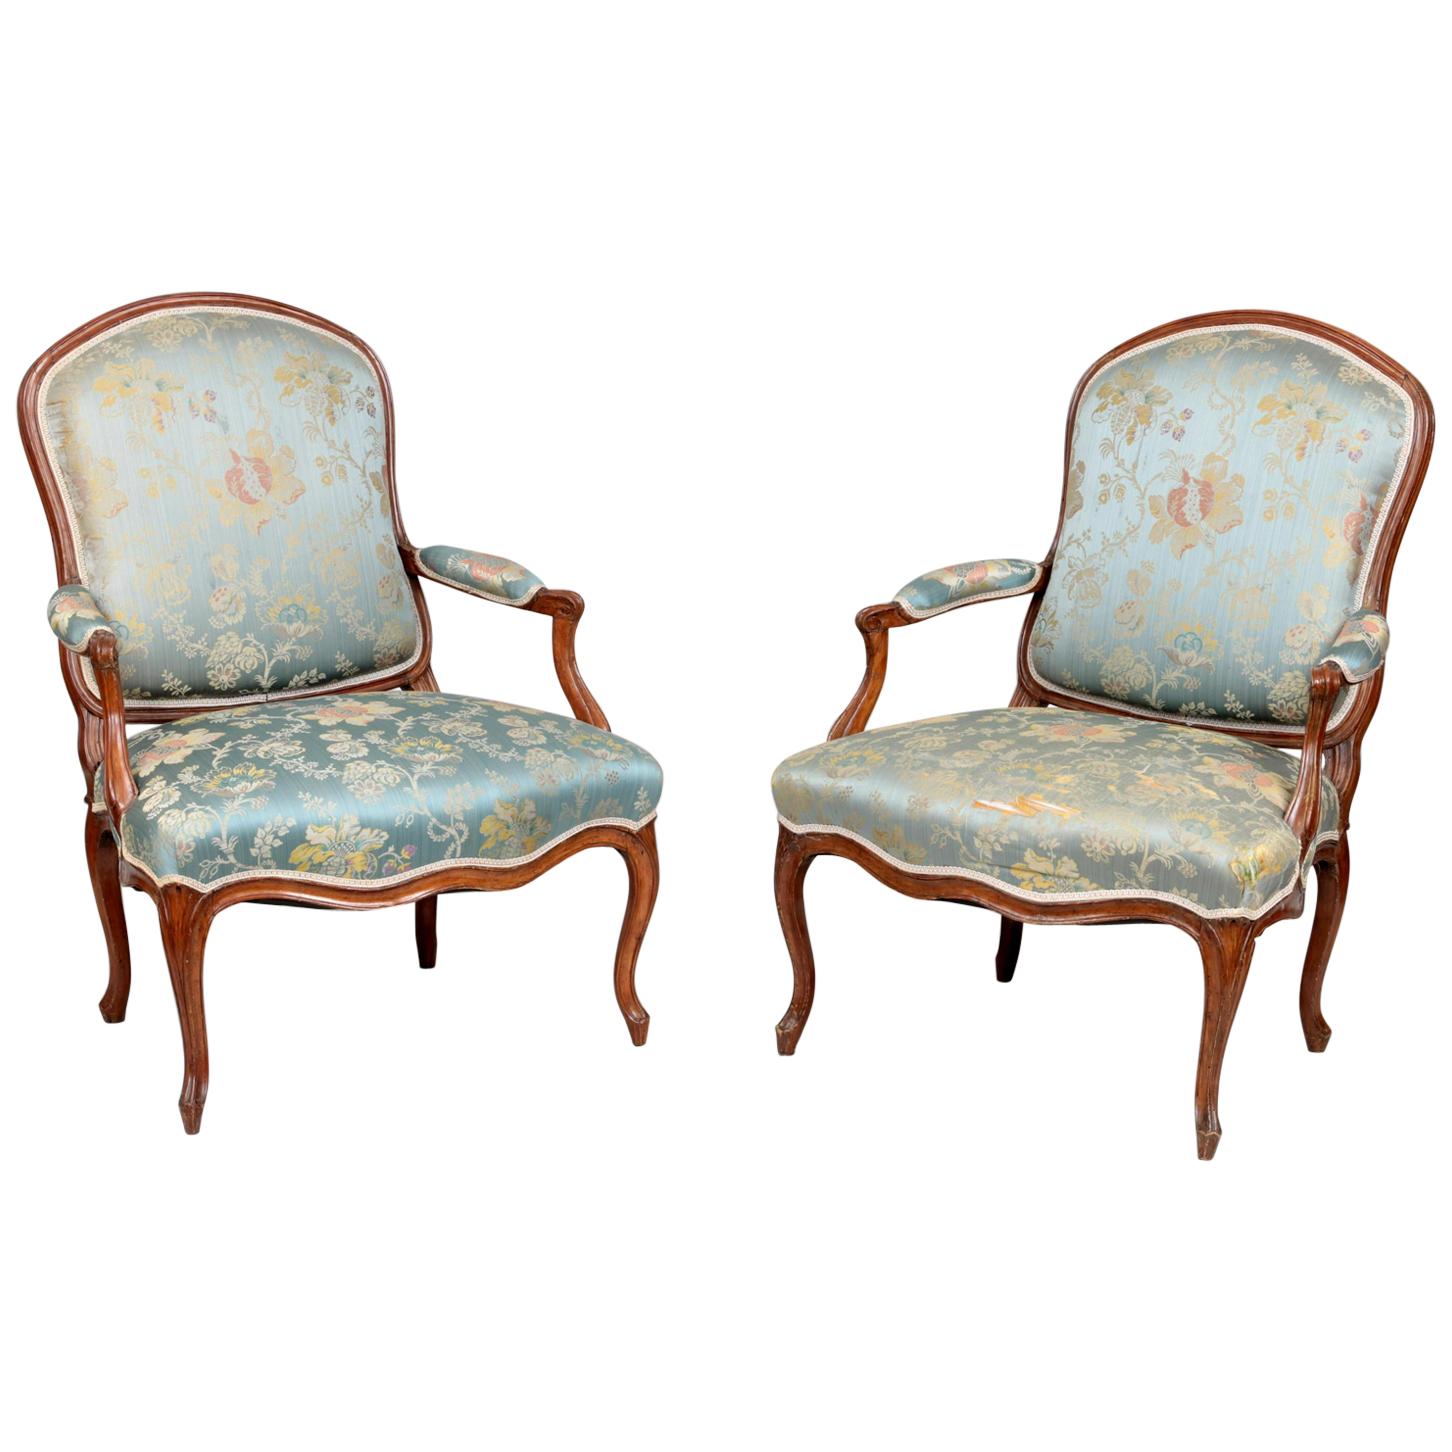 Pair of French Louis XV Armchairs, circa 1760